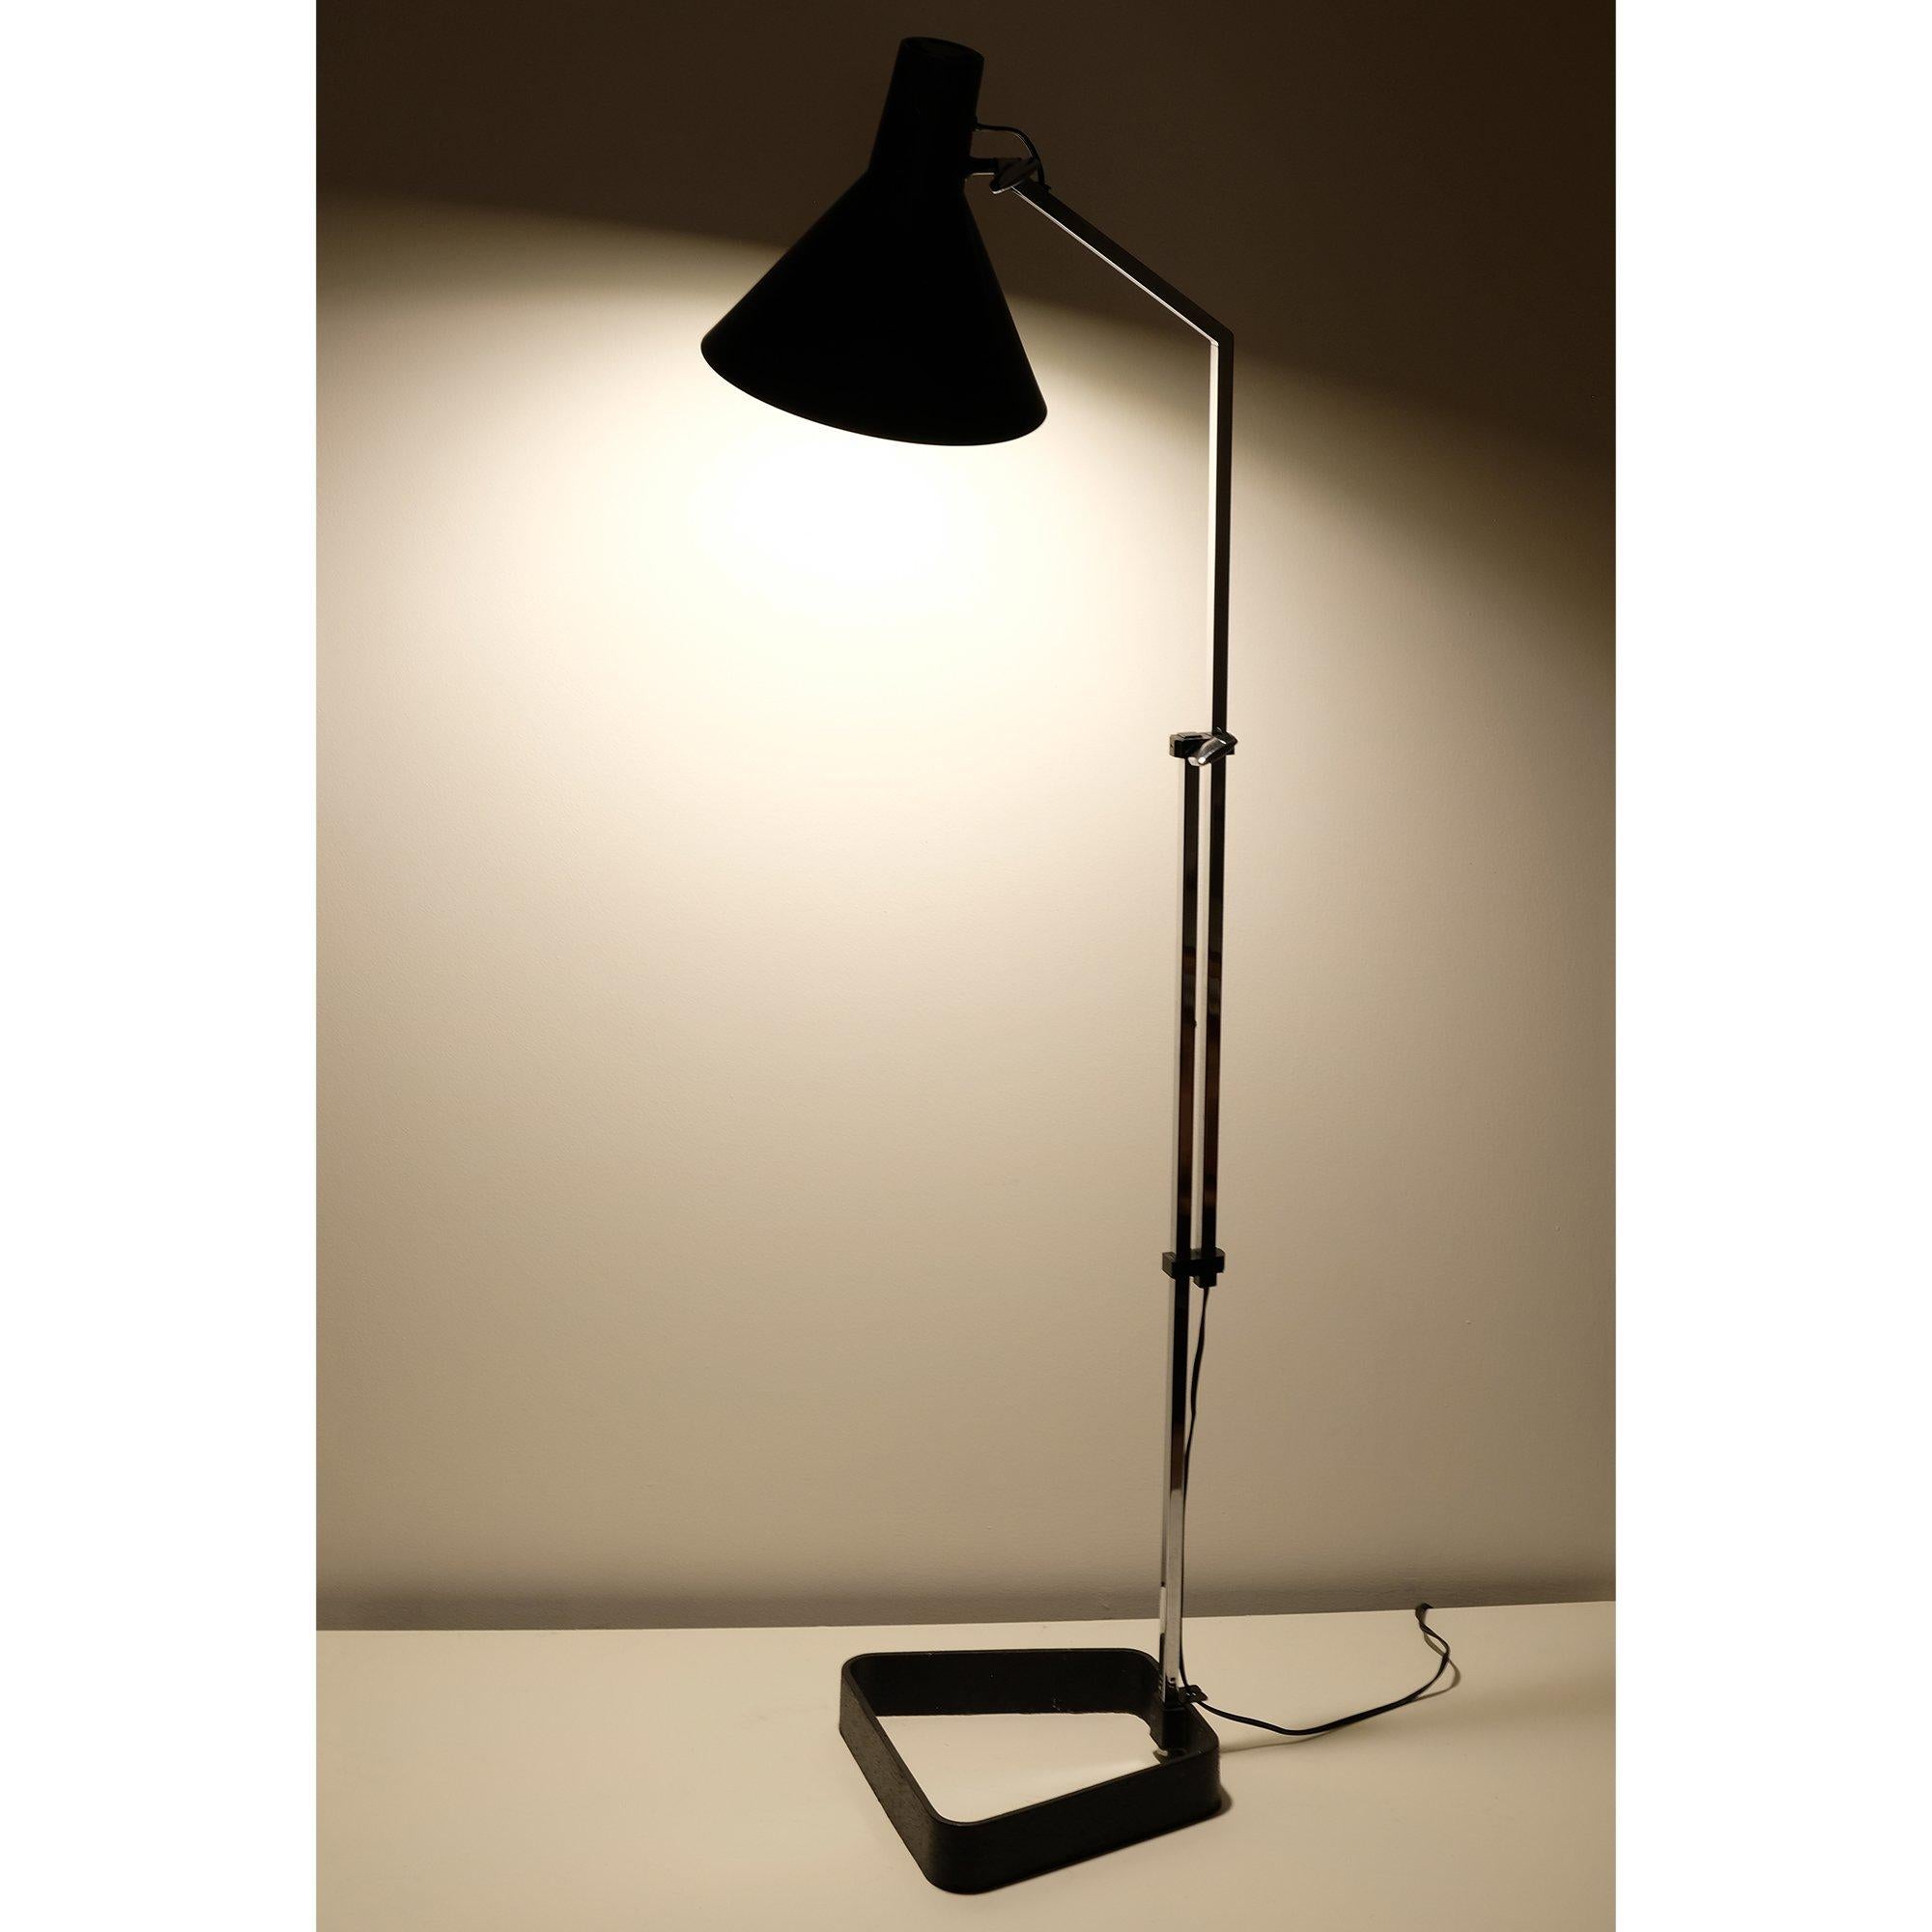 Luxo floor lamp designed by Jac Jacobsen. 60 watts E-26 Edison medium base incandescent bulb recommended or higher if LED/CFL.

 Verifired E-26 Edison medium base socket and 18/2 black cloth cord and polarized north American plug. Tarnish, dings,